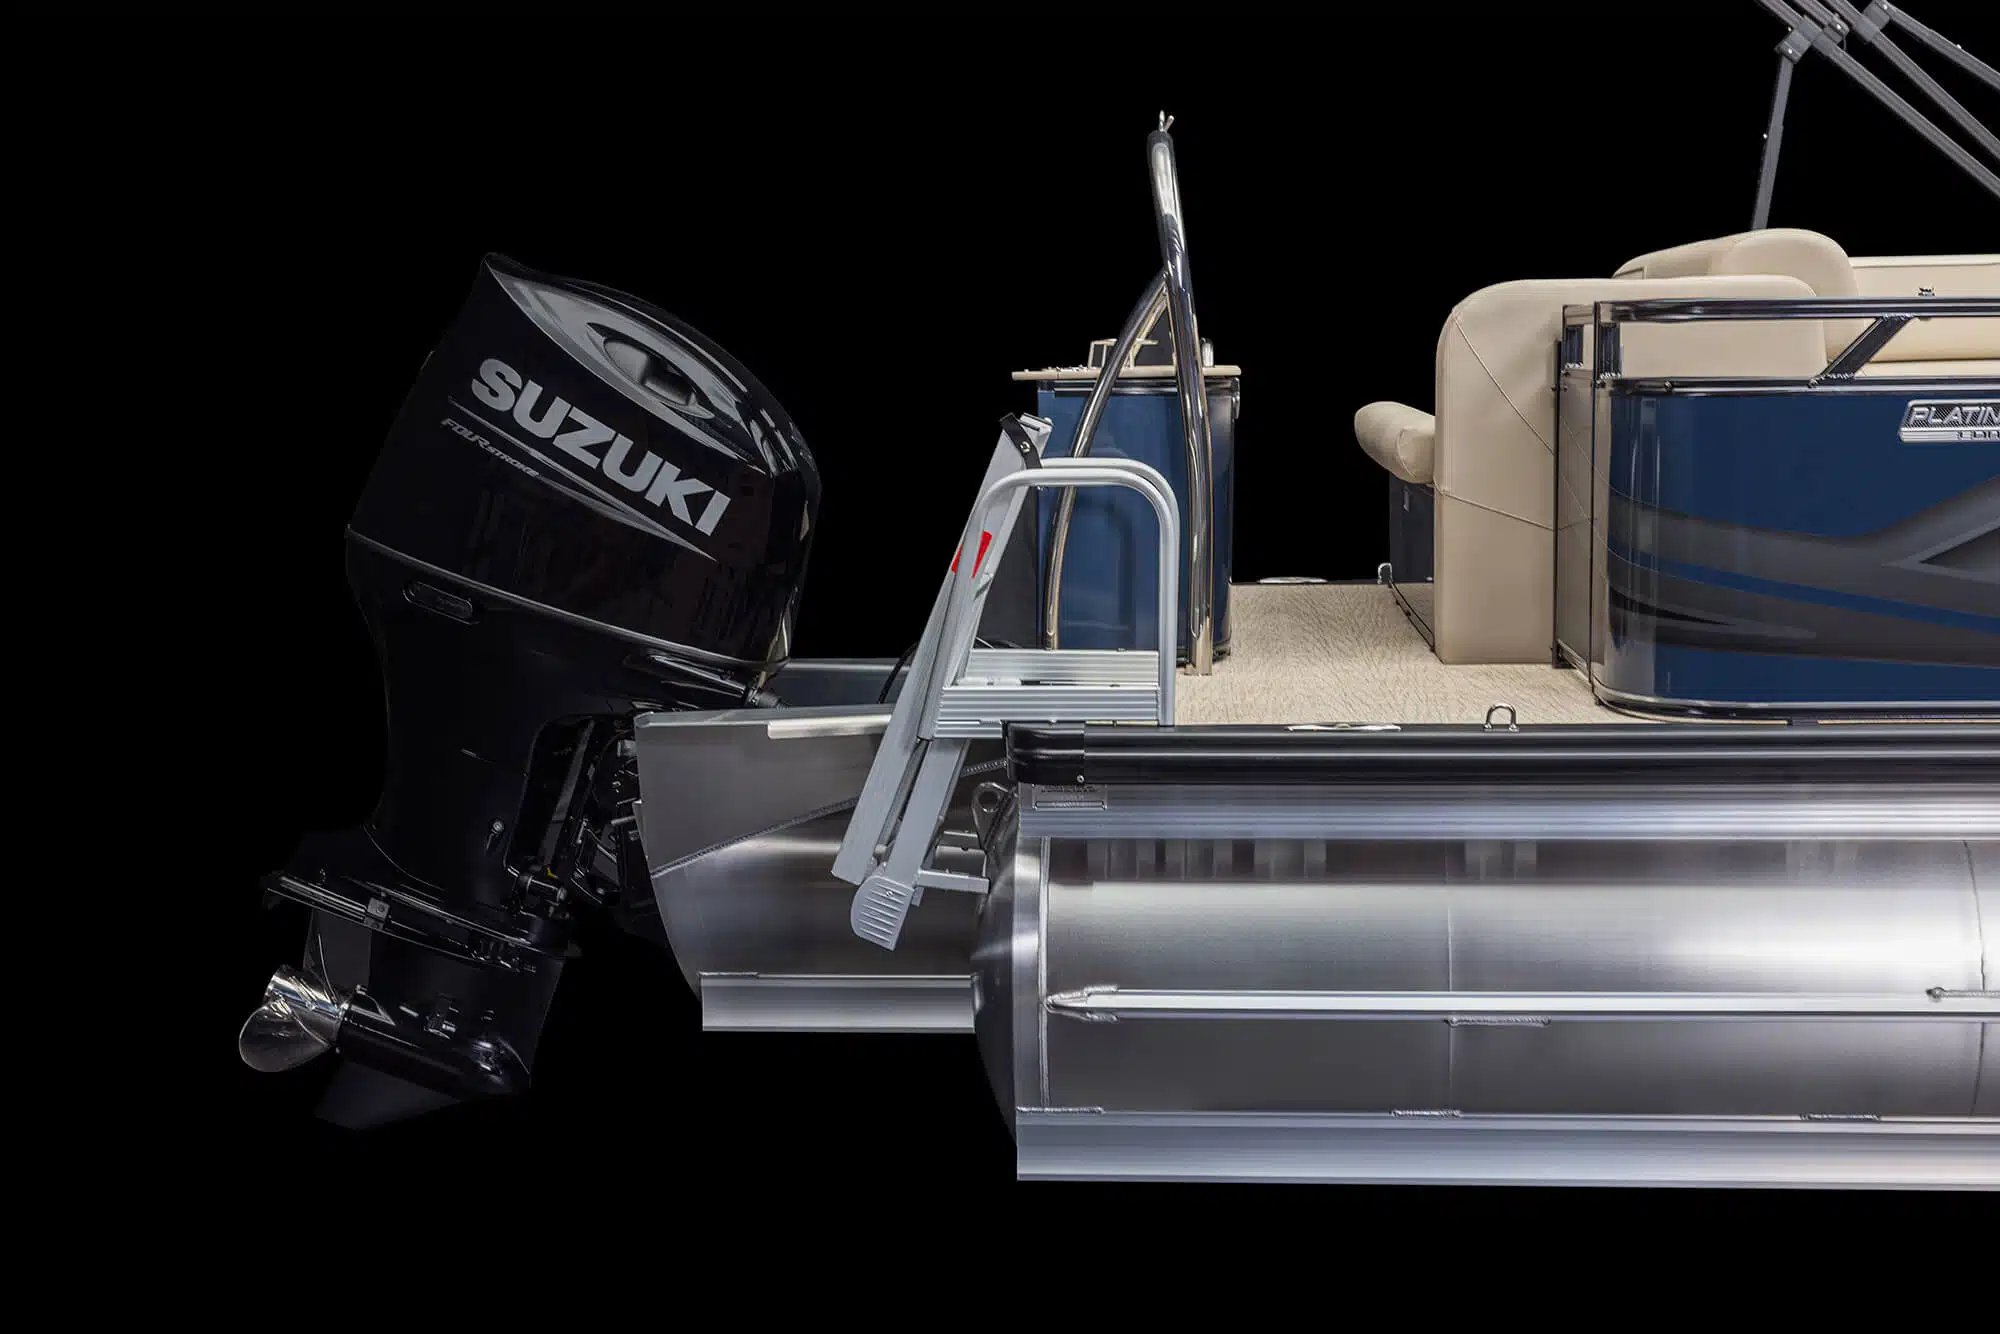 Close-up side view of a Venture Cruise Rear Bench with a Suzuki outboard motor attached at the rear. The boat features metal pontoons, a blue exterior, and an interior with beige seating. A small section of the boat's deck and stairs is also visible. The background is black.